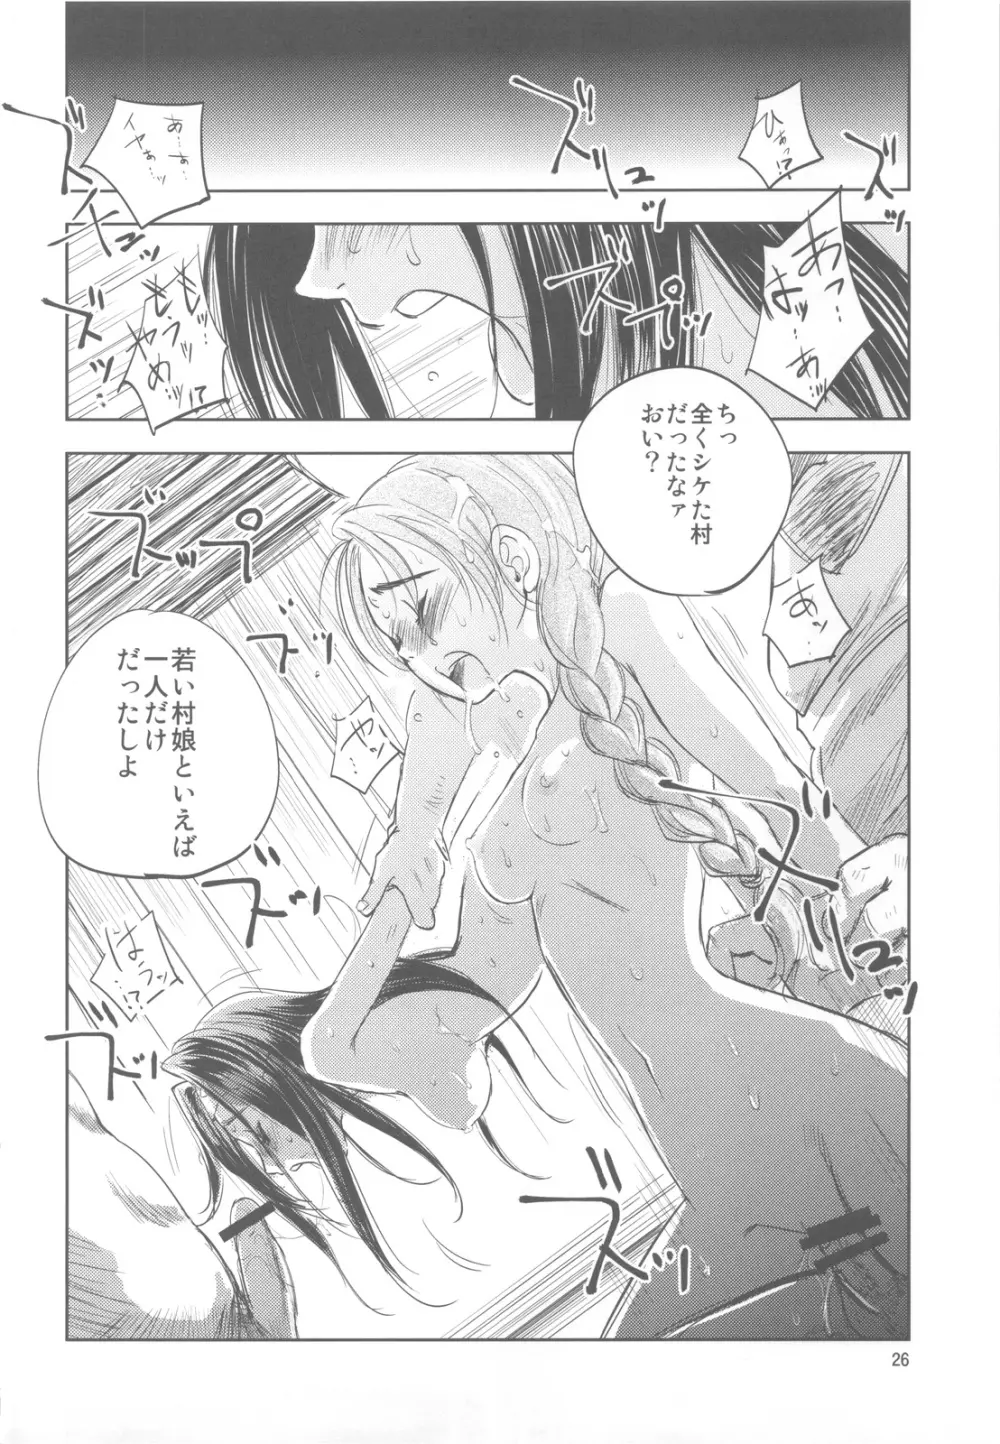 GRASSEN'S WAR ANOTHER STORY Ex #01 ノード侵攻 I - page25